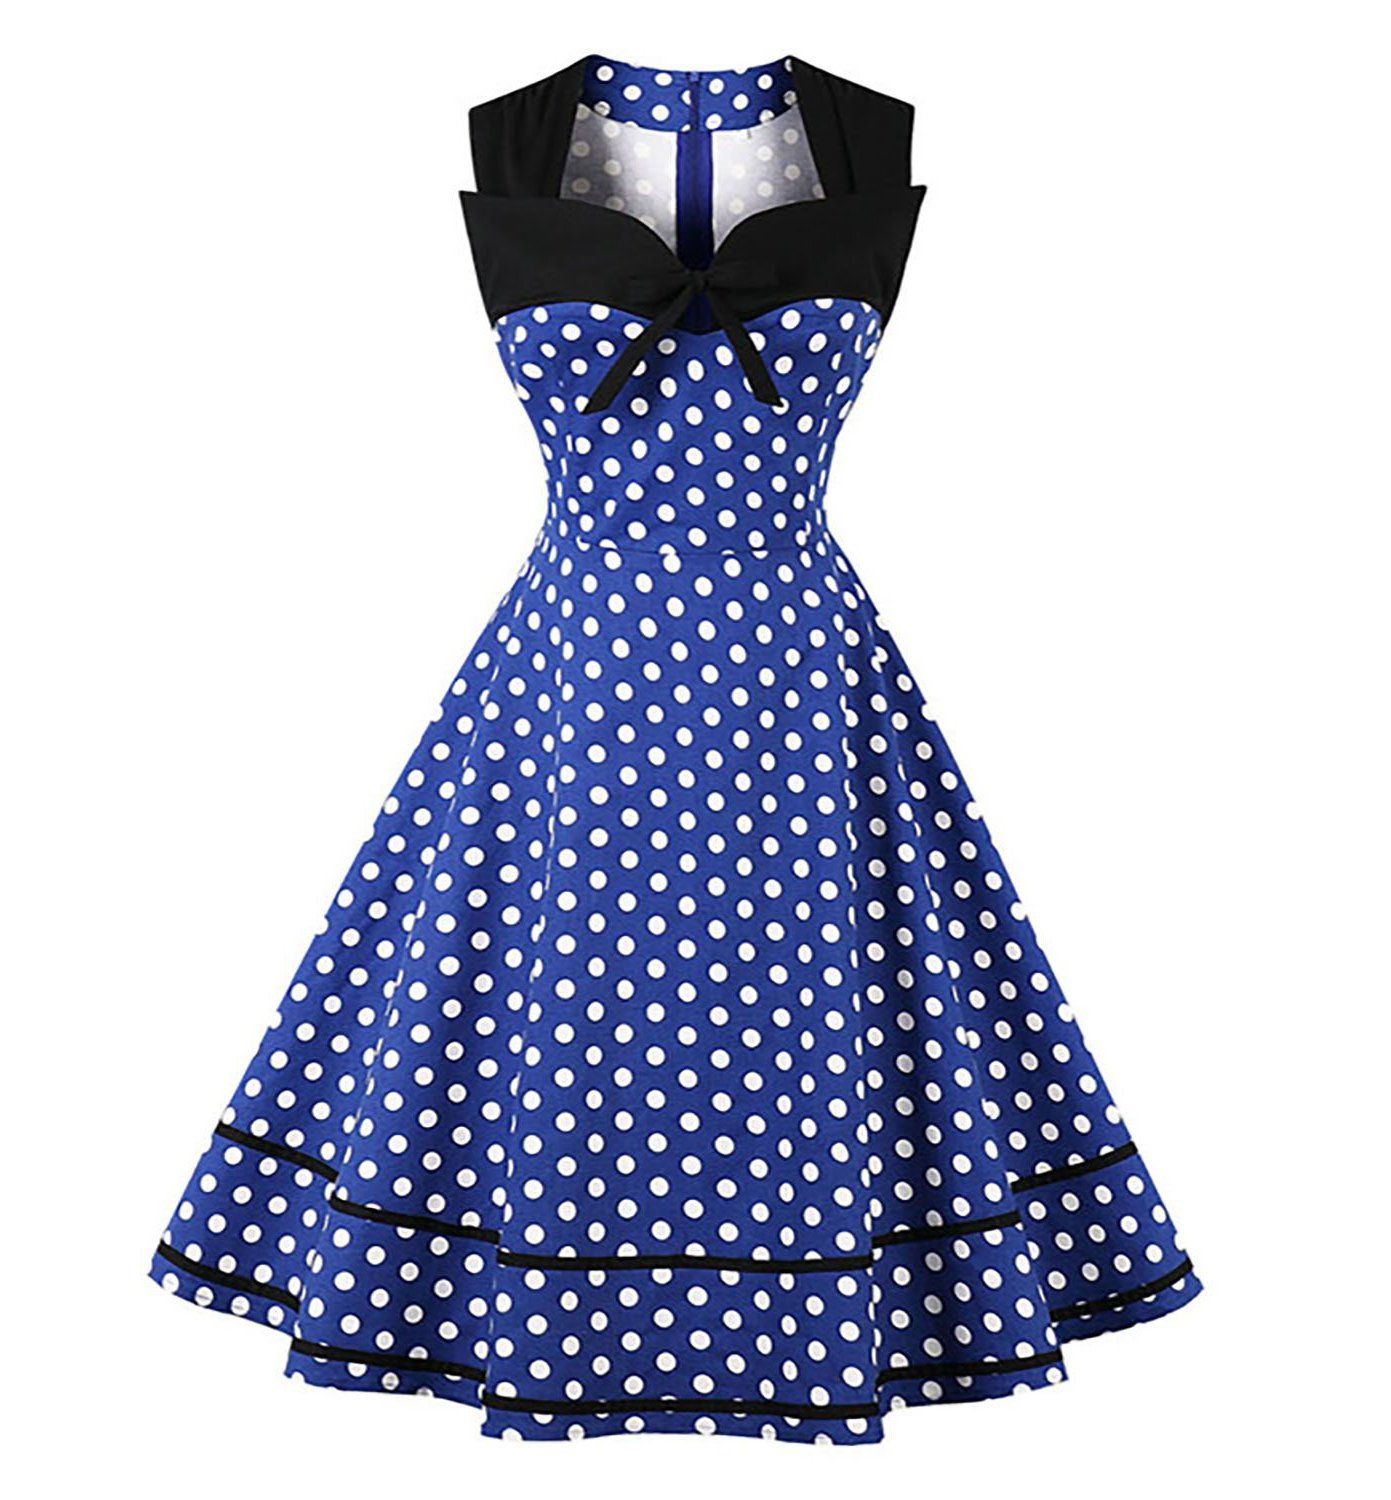 Polka Dot Retro Vintage Style Cocktail Party Swing Dress – VINTAGEPOST